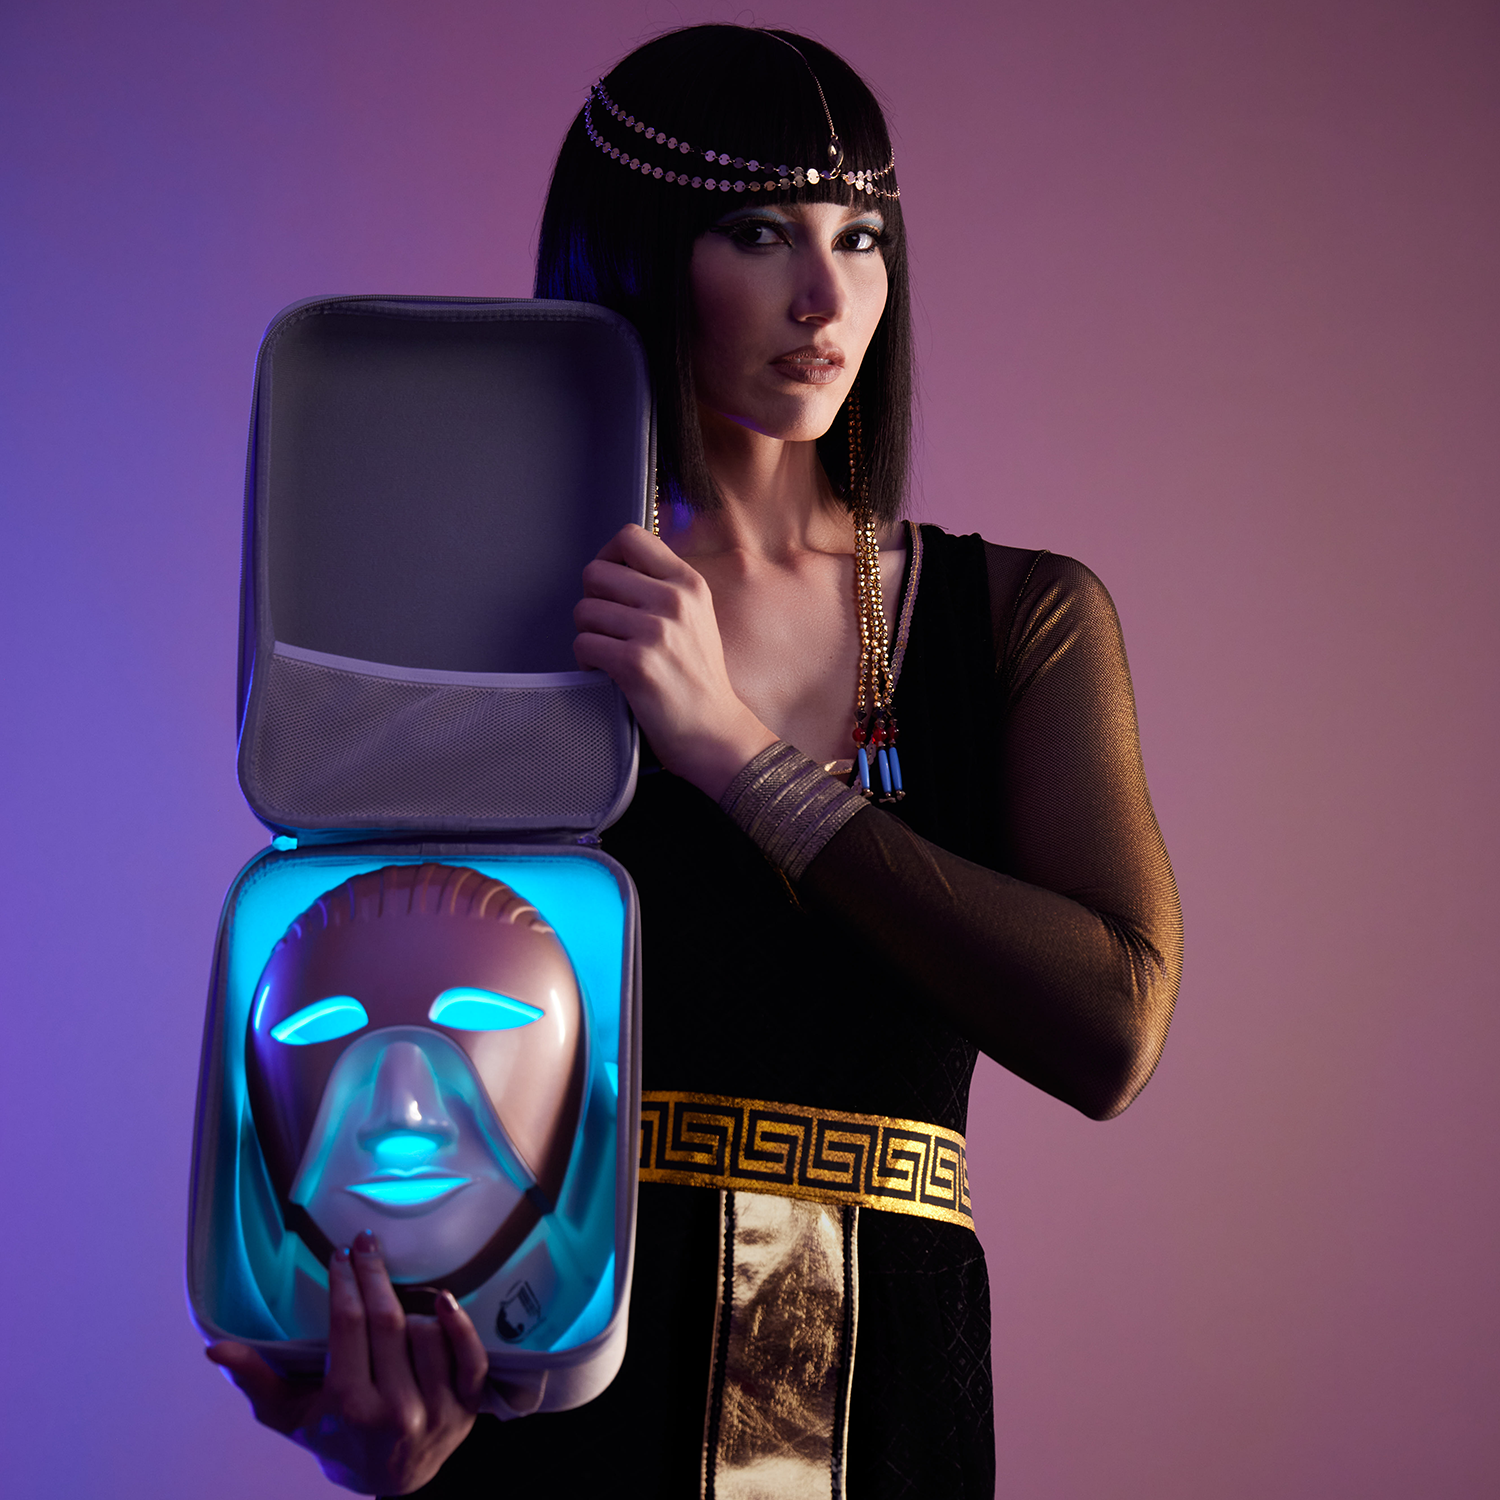 Cleopatra LED Mask - Memorial Day Deal